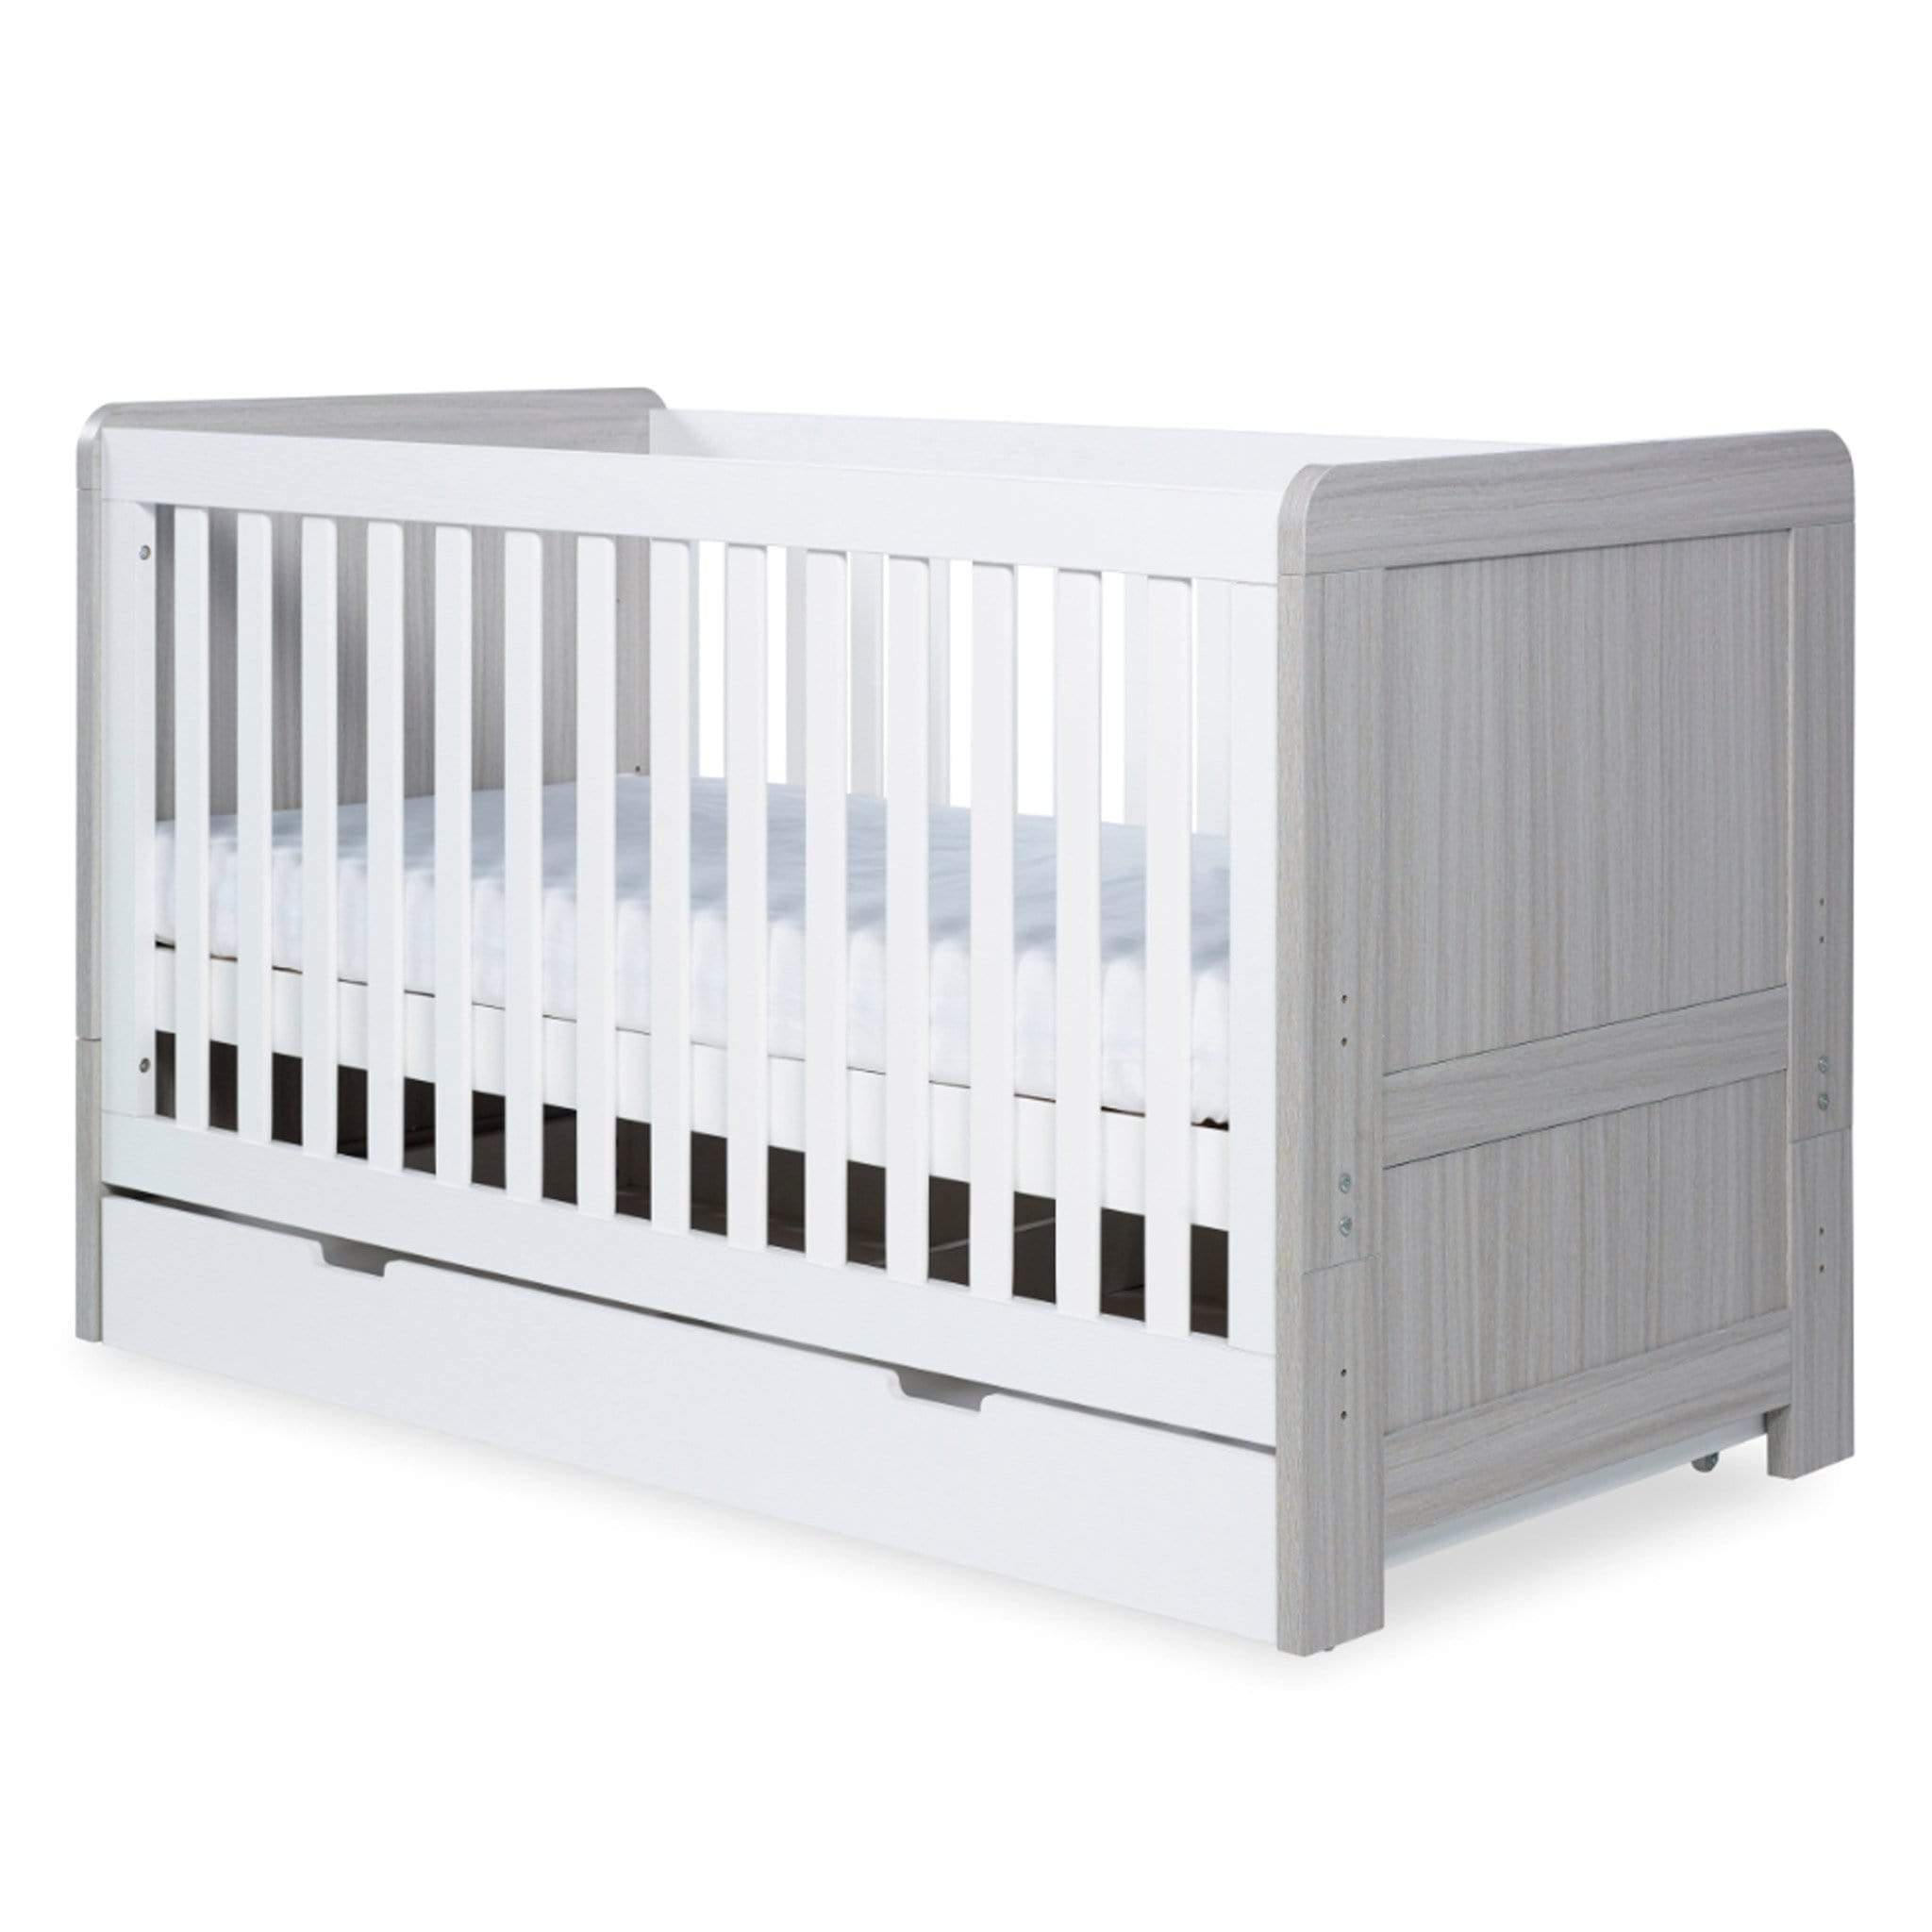 Ickle Bubba cot bed room sets Ickle Bubba Pembrey 3 Piece Nursery Room Set & Under Drawer Ash Grey & White